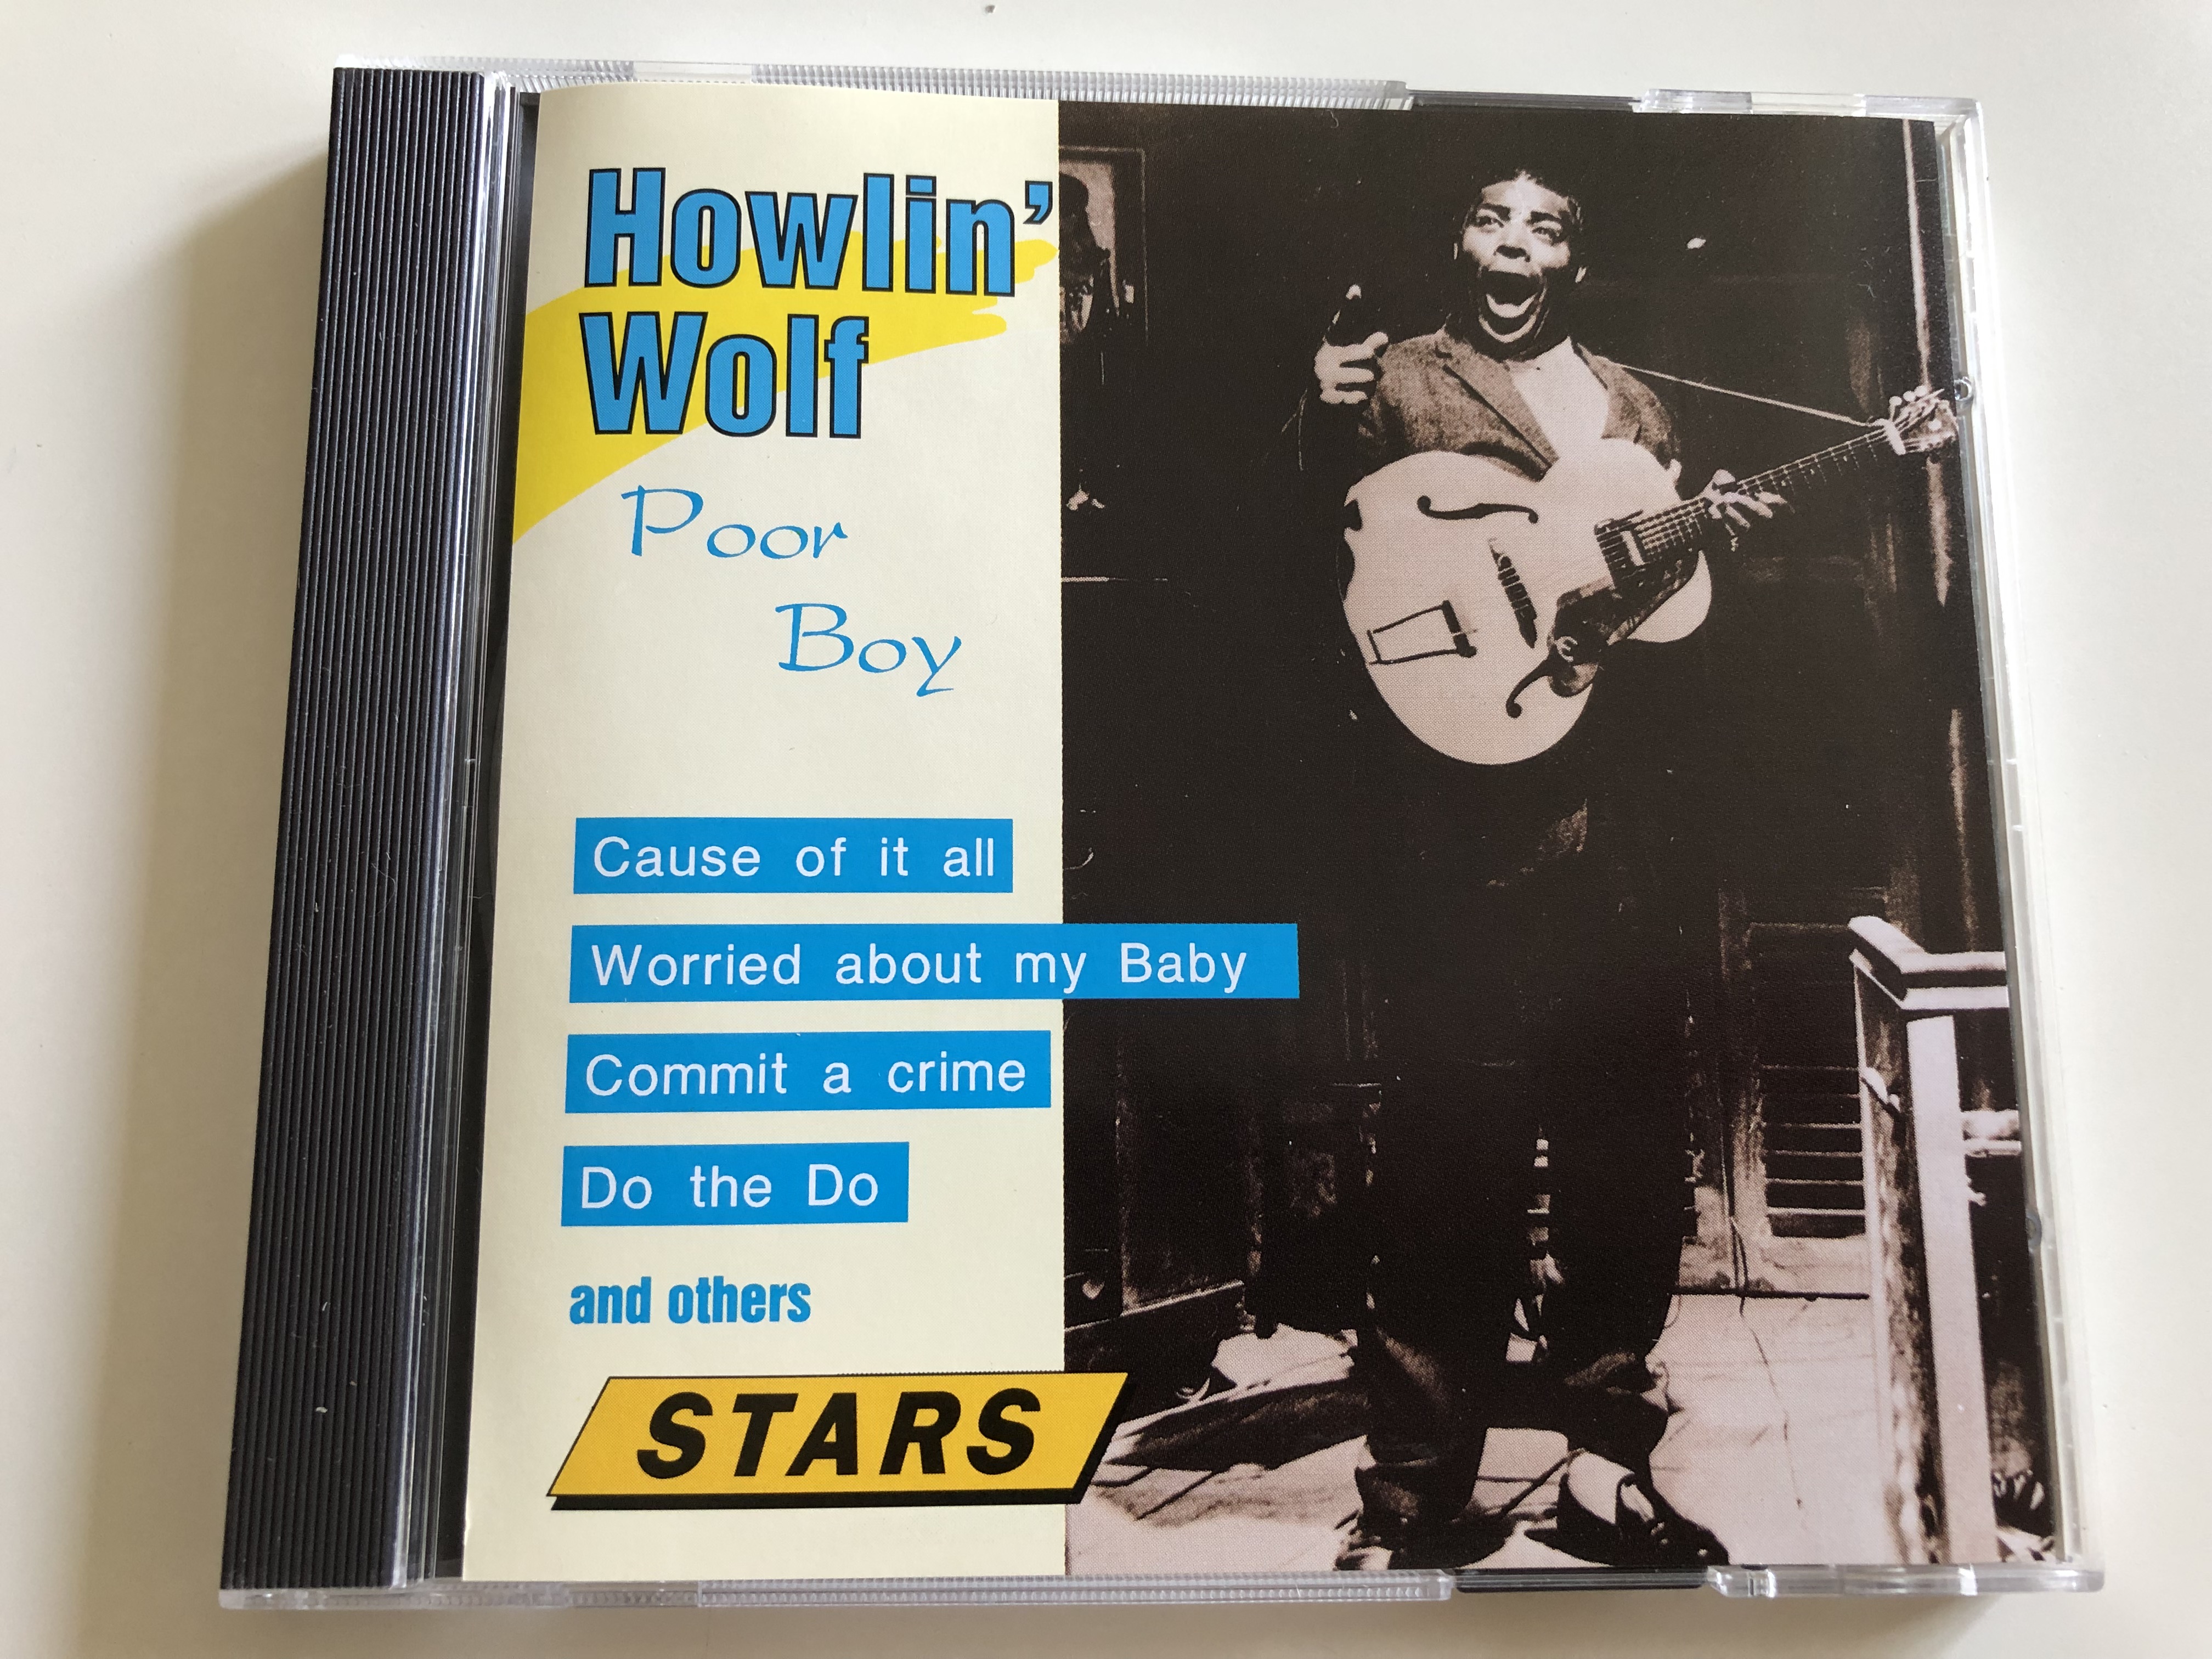 howlin-wolf-poor-boy-cause-of-it-all-worried-about-my-baby-commit-a-crime-do-the-do-and-other-audio-cd-1994-pilz-cd-stereo-fm-8359-2-1-.jpg